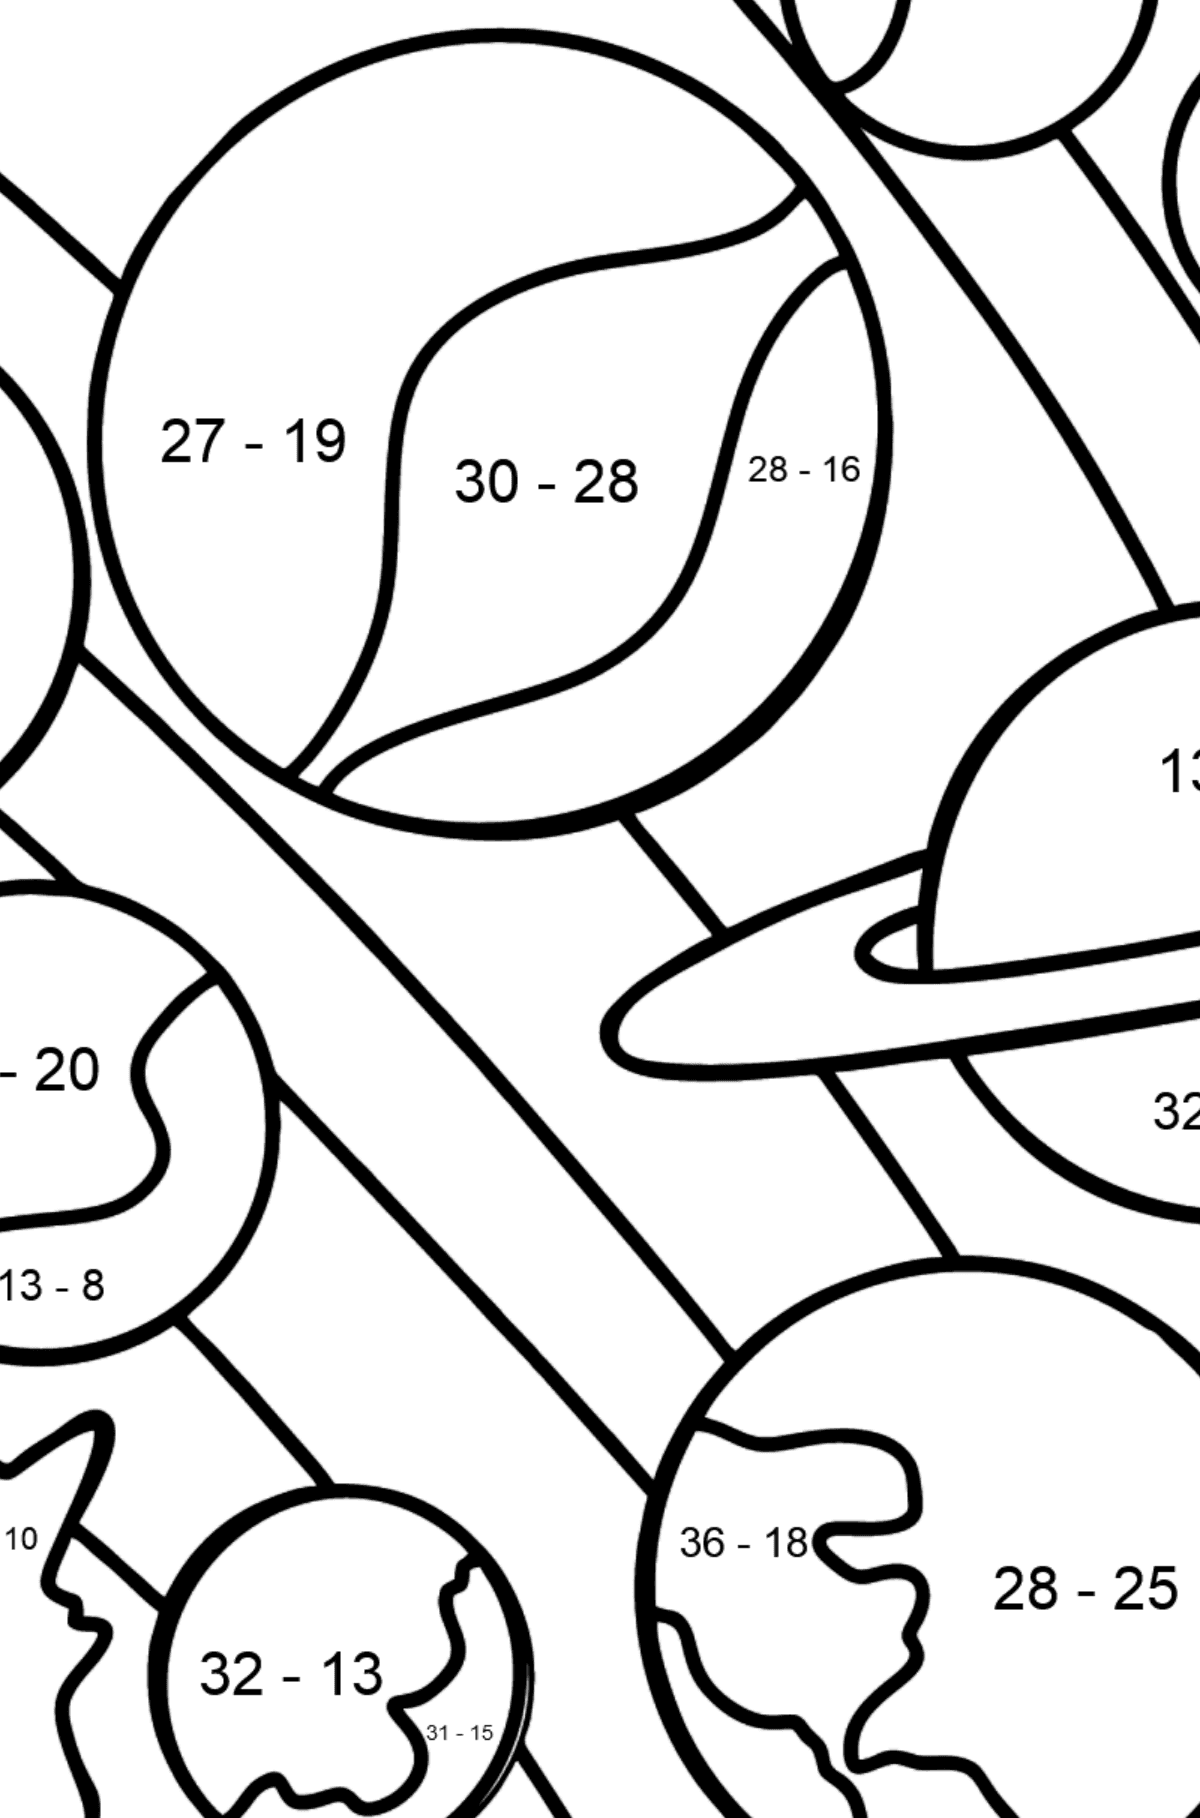 Solar System coloring page - Math Coloring - Subtraction for Kids